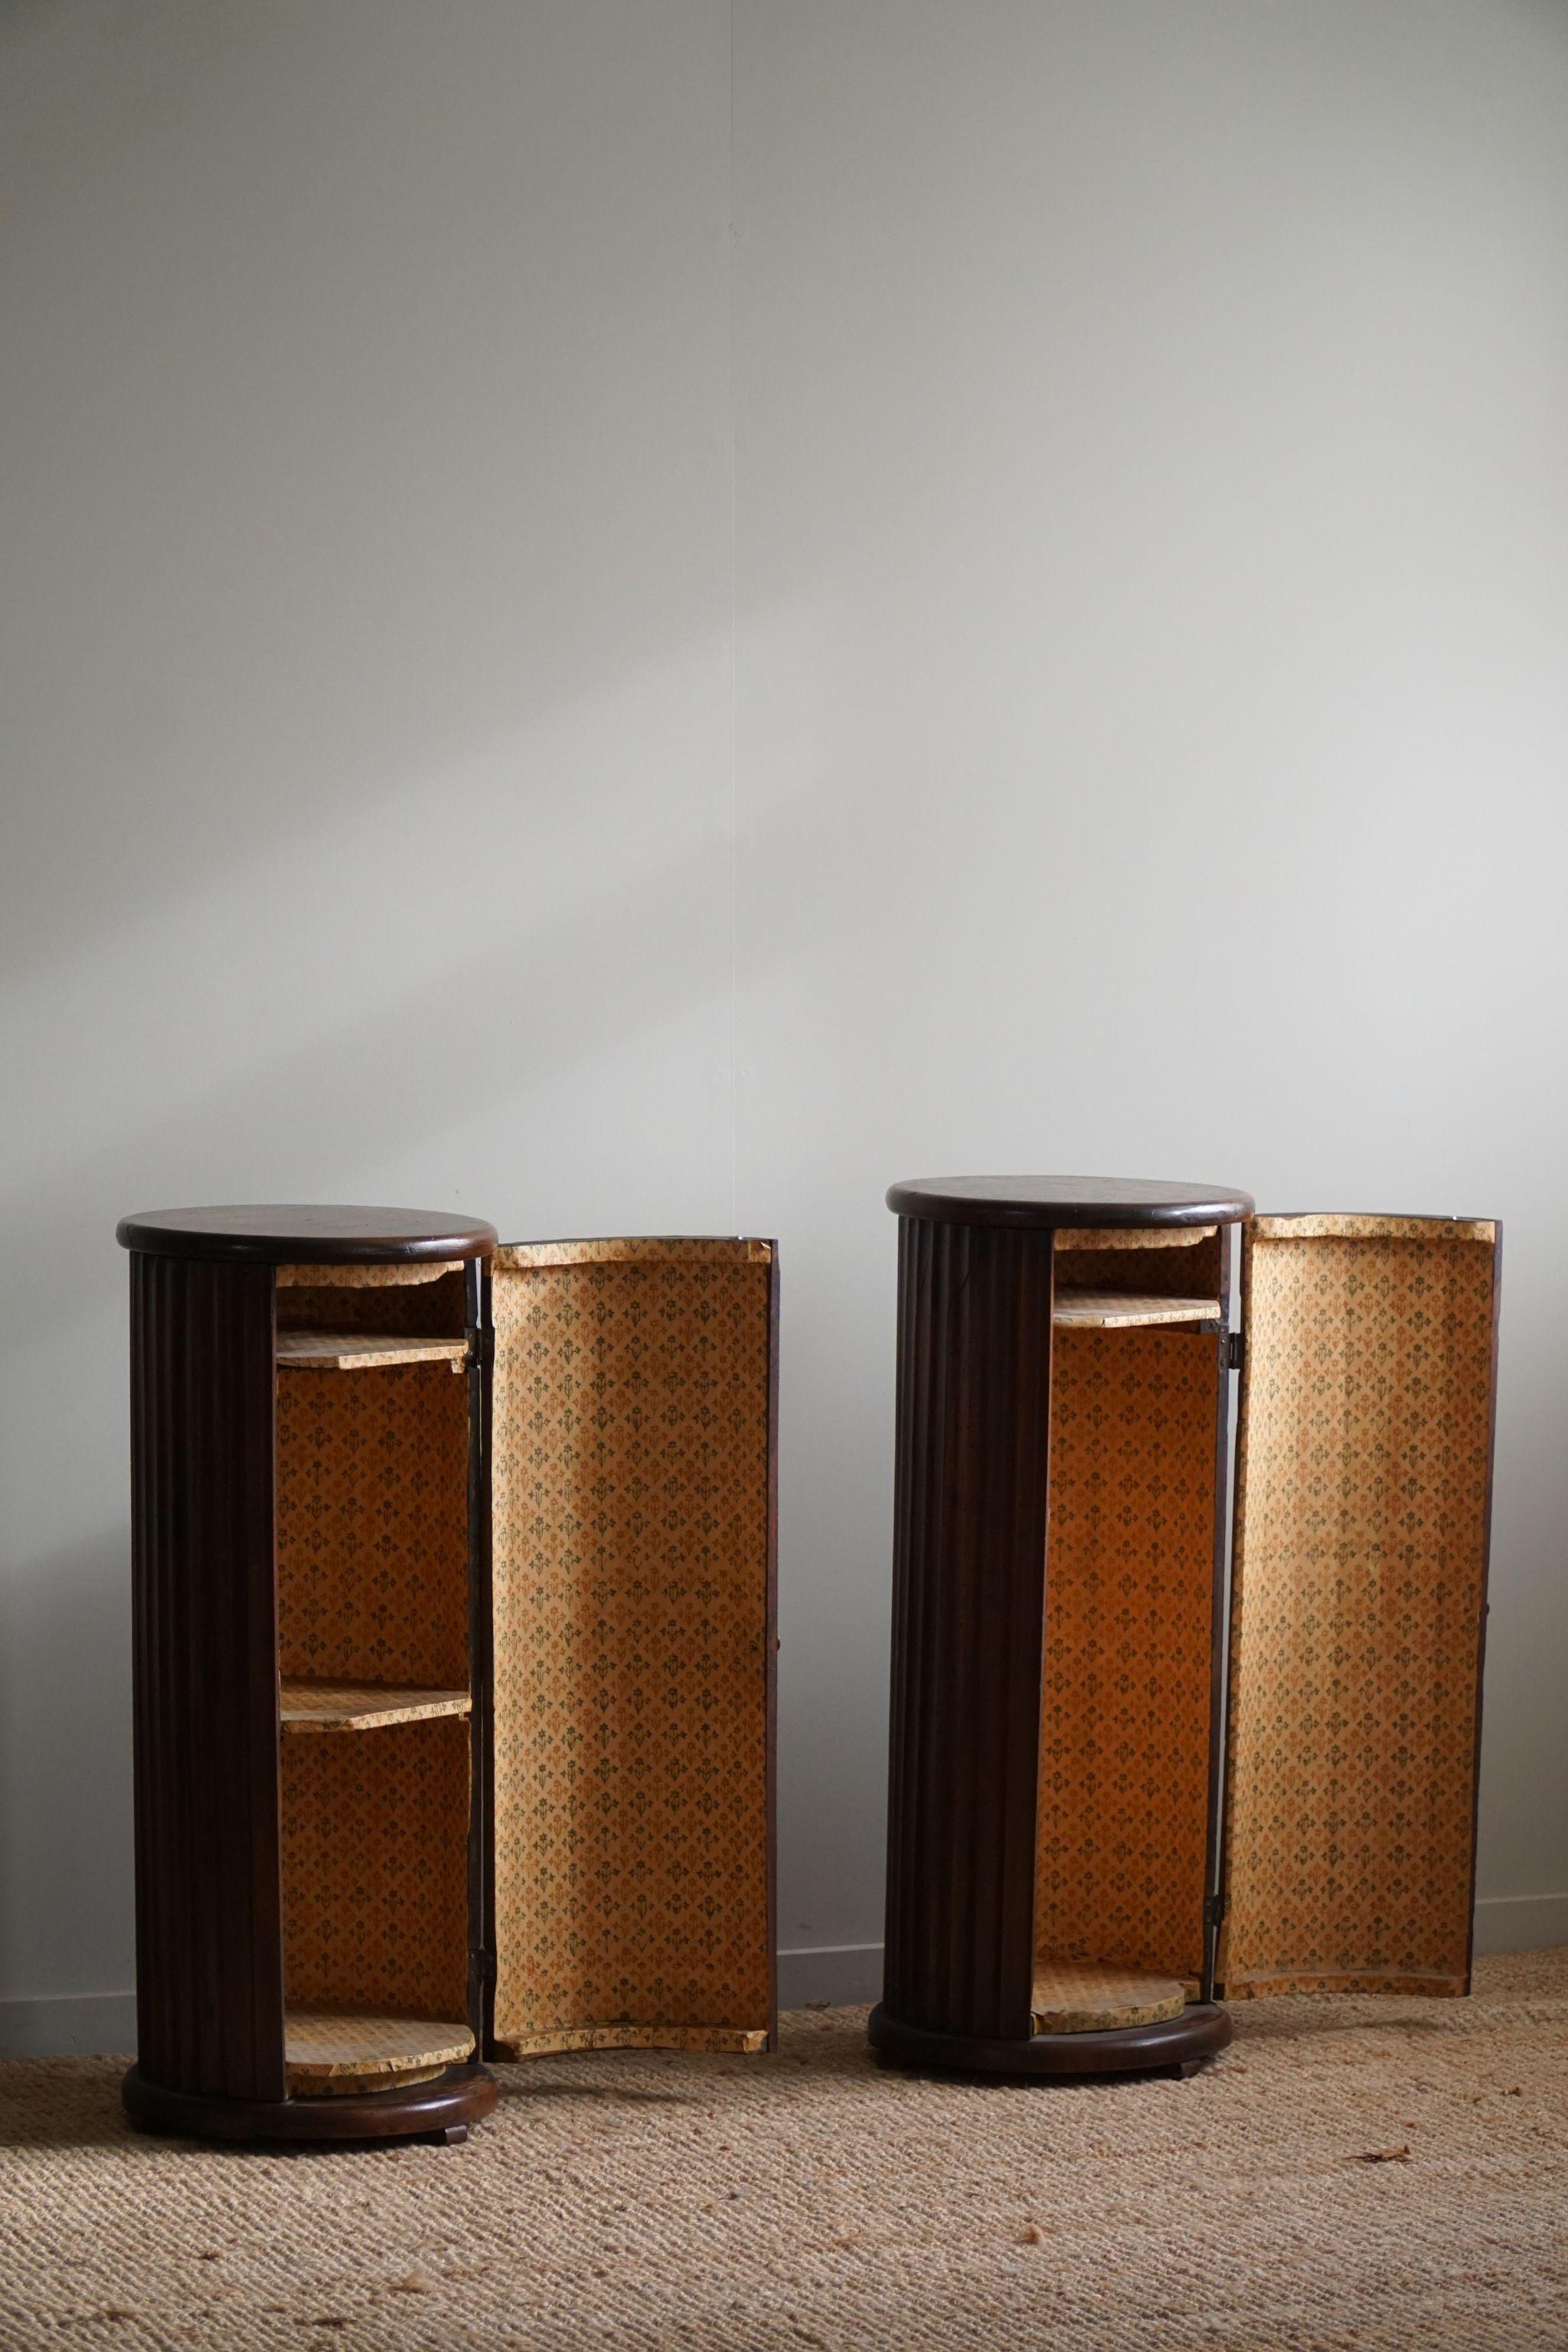 A Pair of Antique Pedestals With Storage, Nutwood, Italian Cabinetmaker, 1880s  1